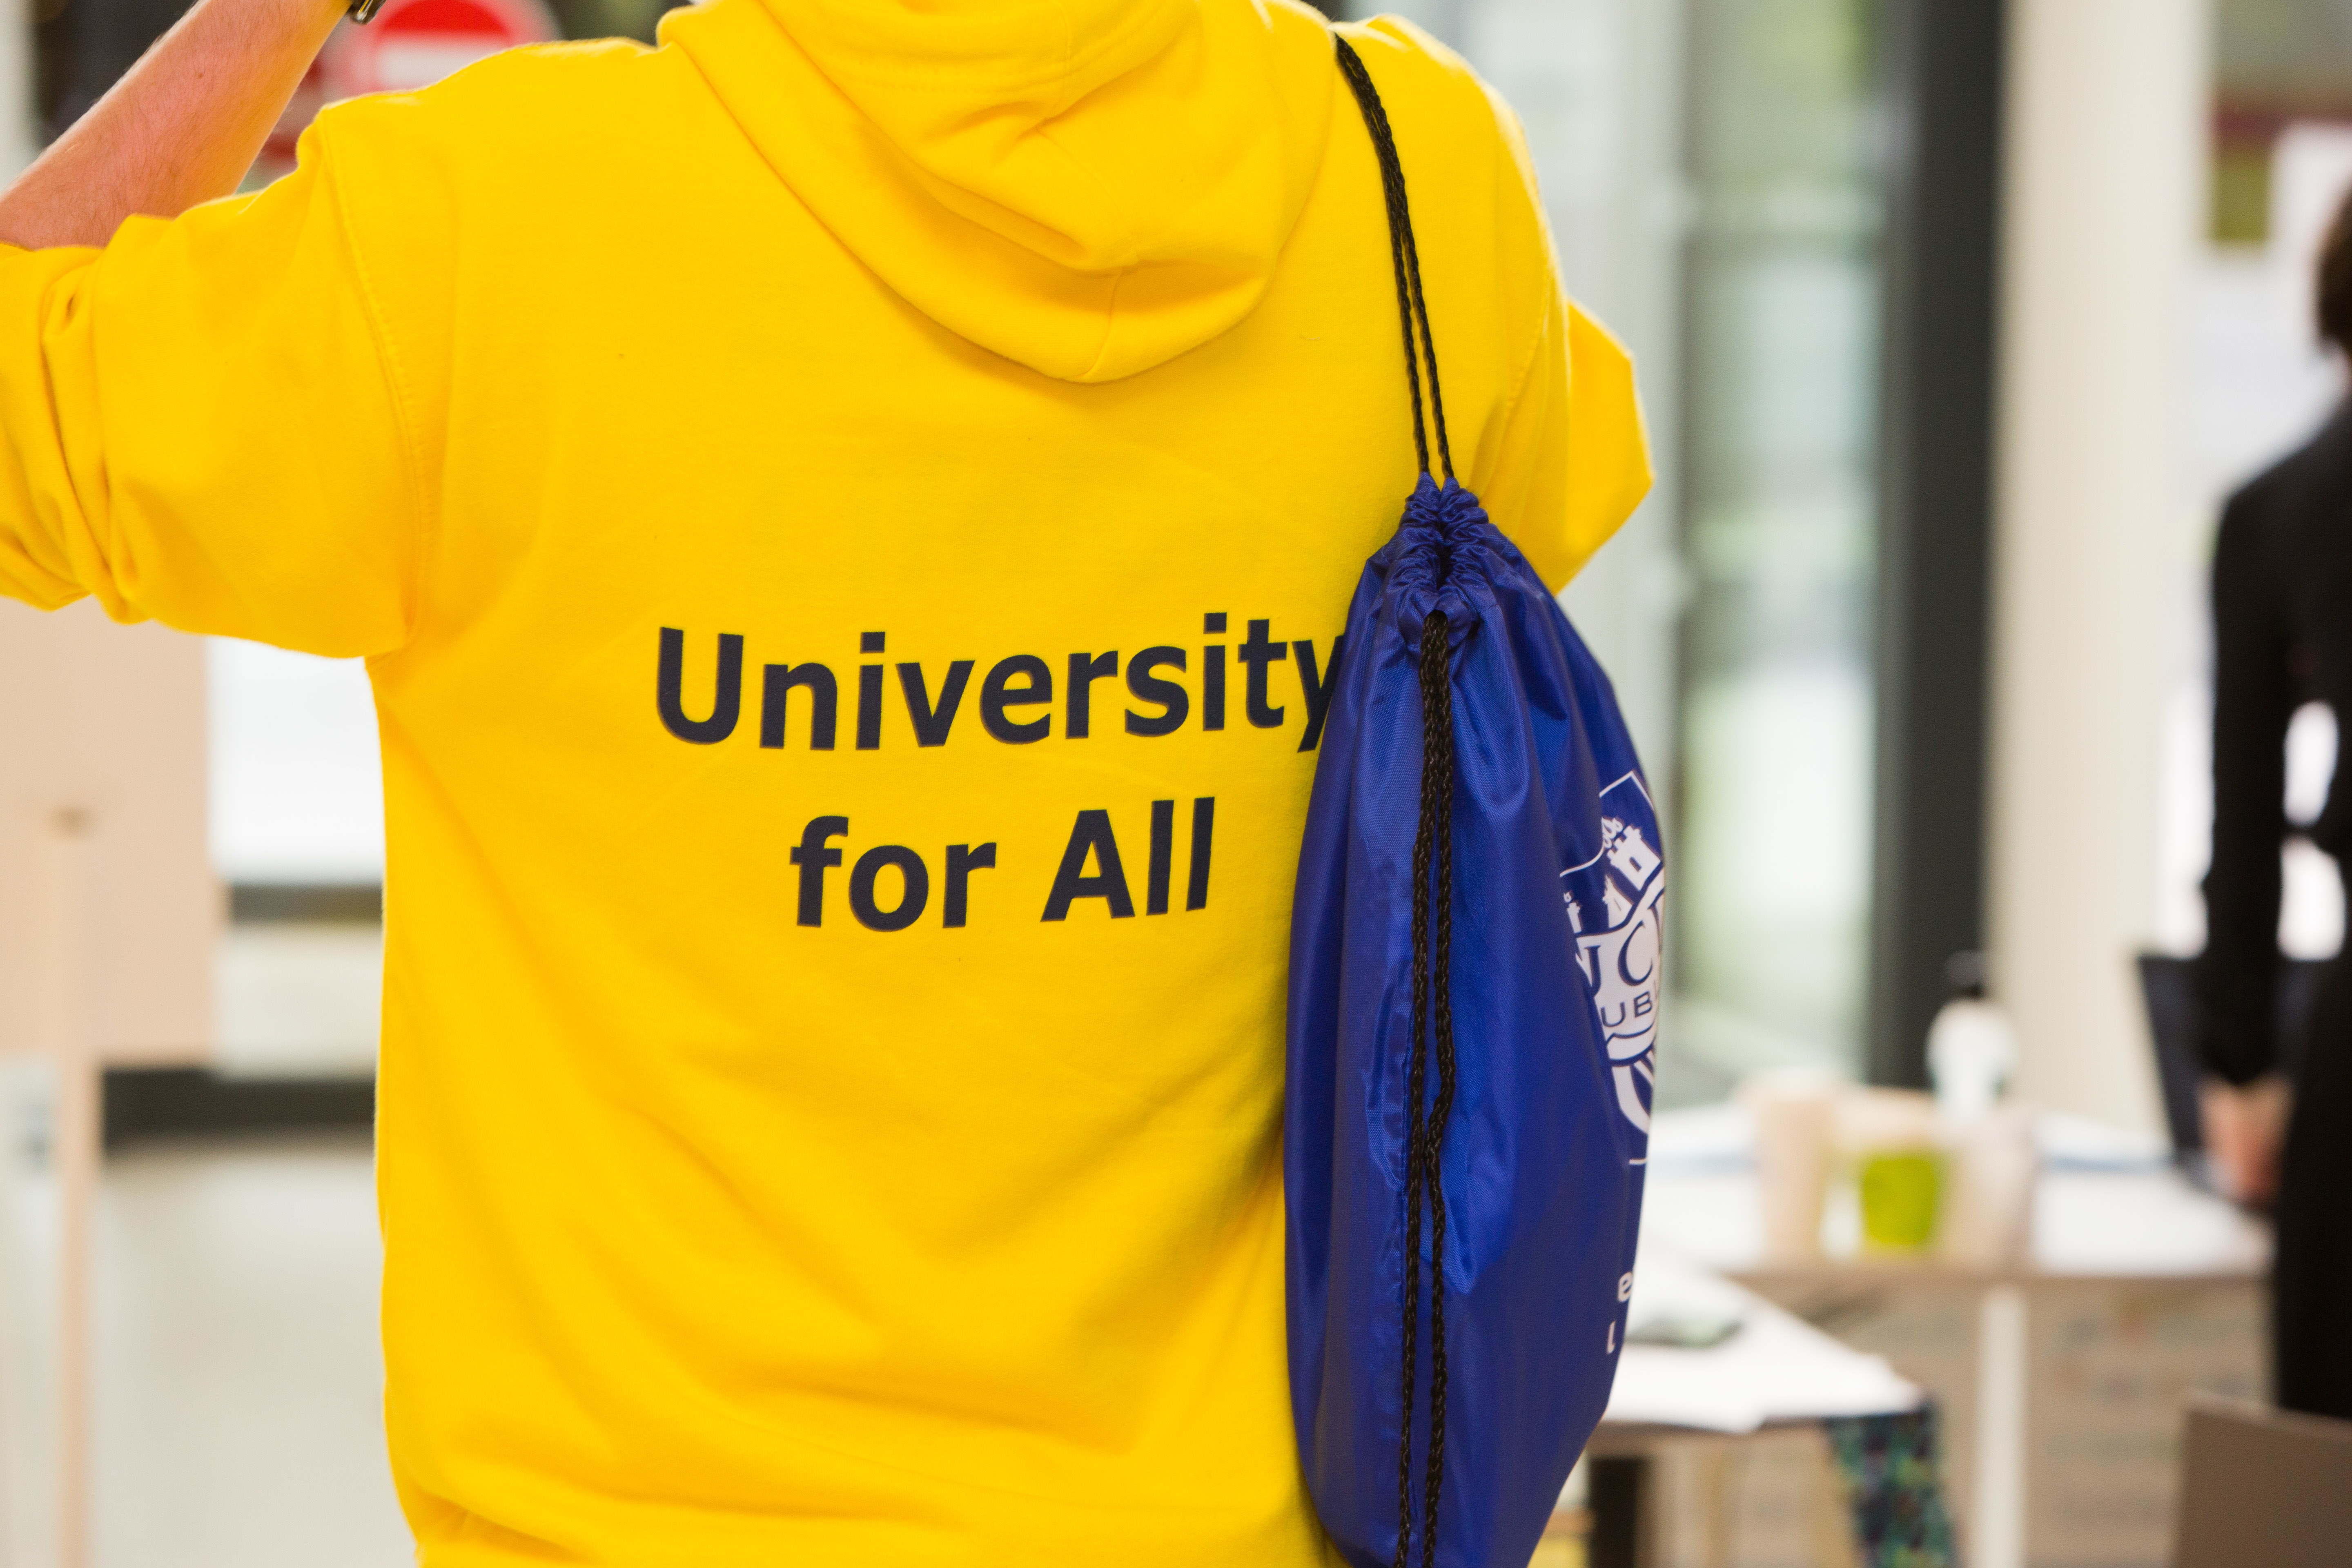 Discover our work promoting inclusion and learn how you can be part of our University for All initiative.